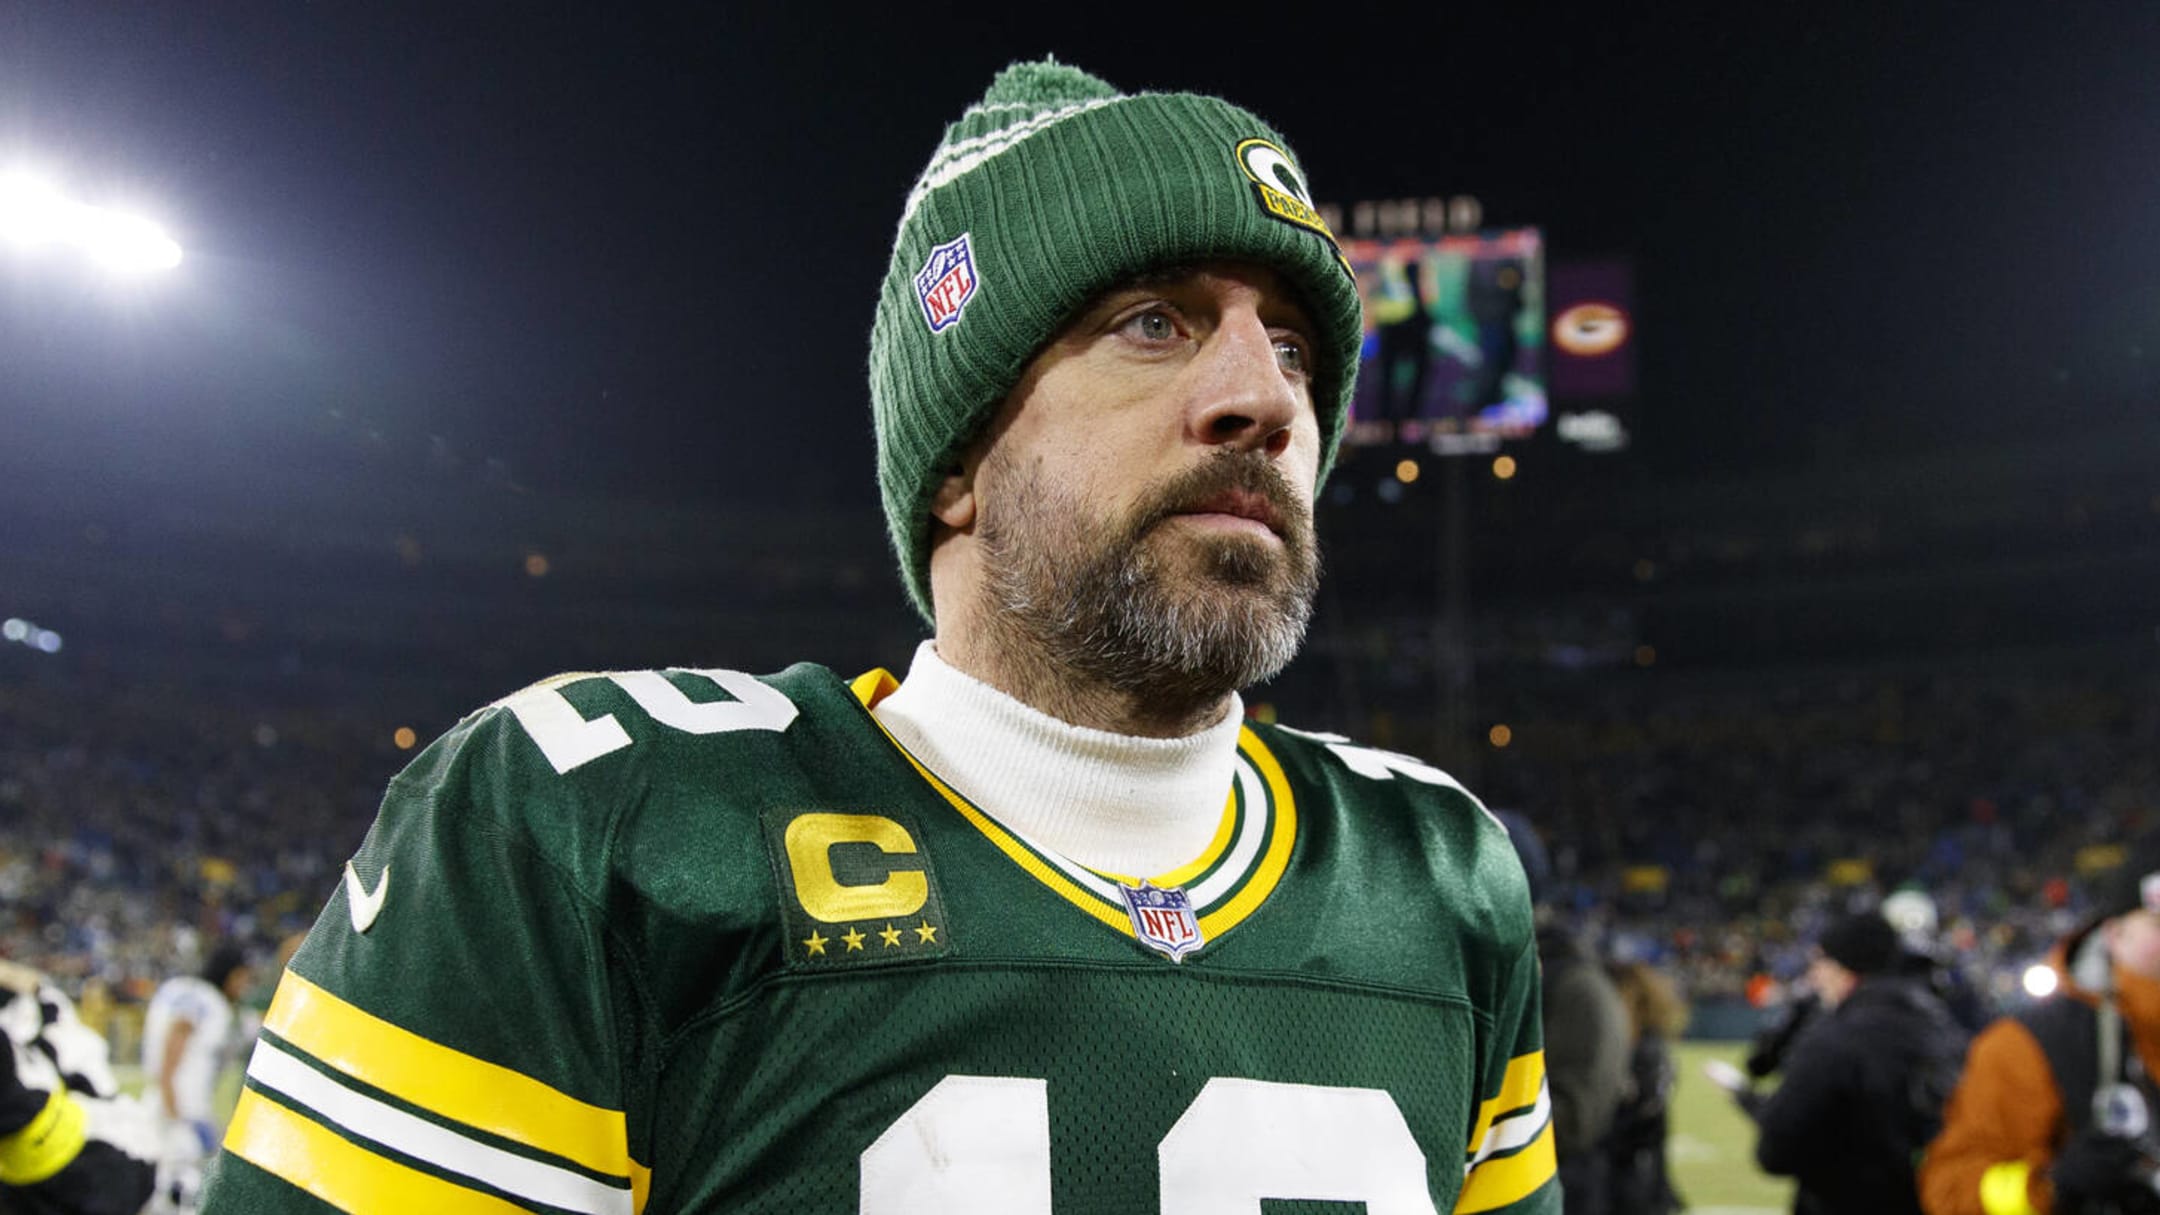 Report: Aaron Rodgers Trade in Play for Packers